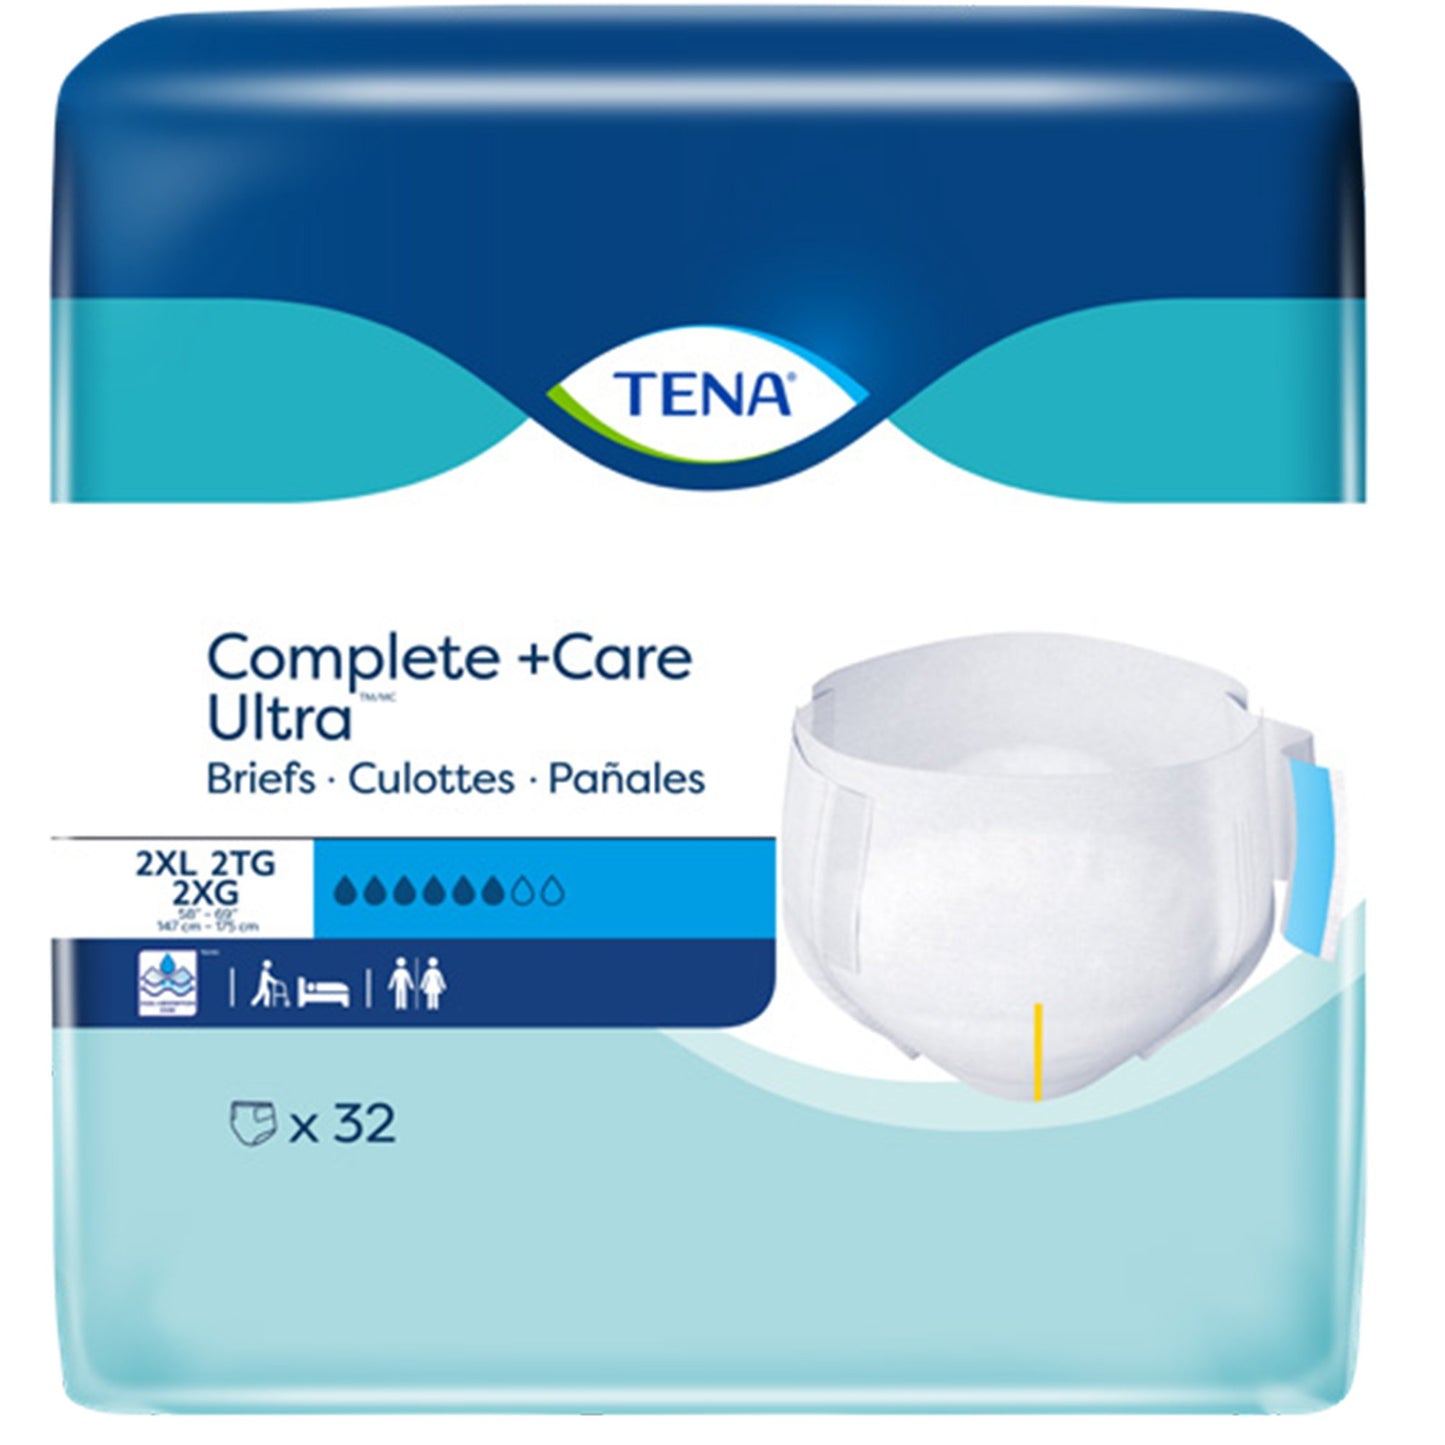 TENA Complete +Care Ultra™ Incontinence Brief, 2X-Large, 32 ct